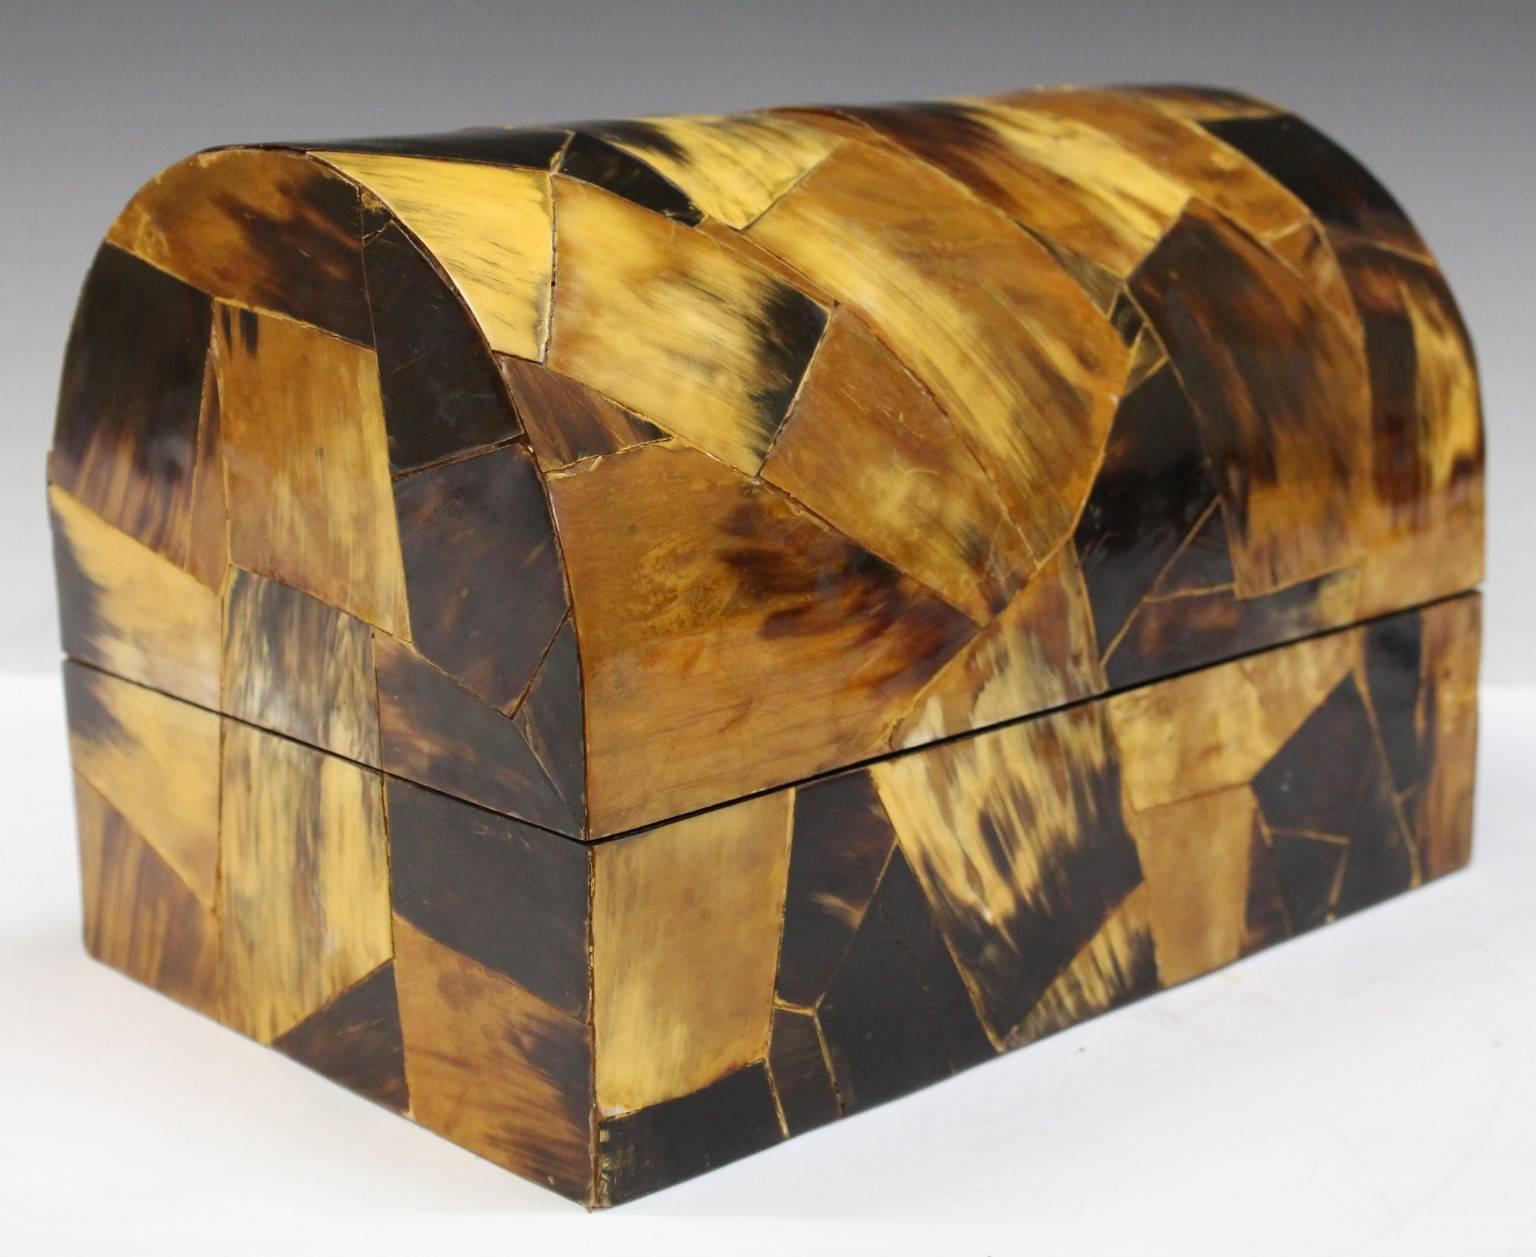 A vintage decorative box with hinged dome top, produced circa 1970s, entirely veneered in patchwork of multi-toned Horn. Overall good condition, consistent with age and use, including some wear to the interior.

9490